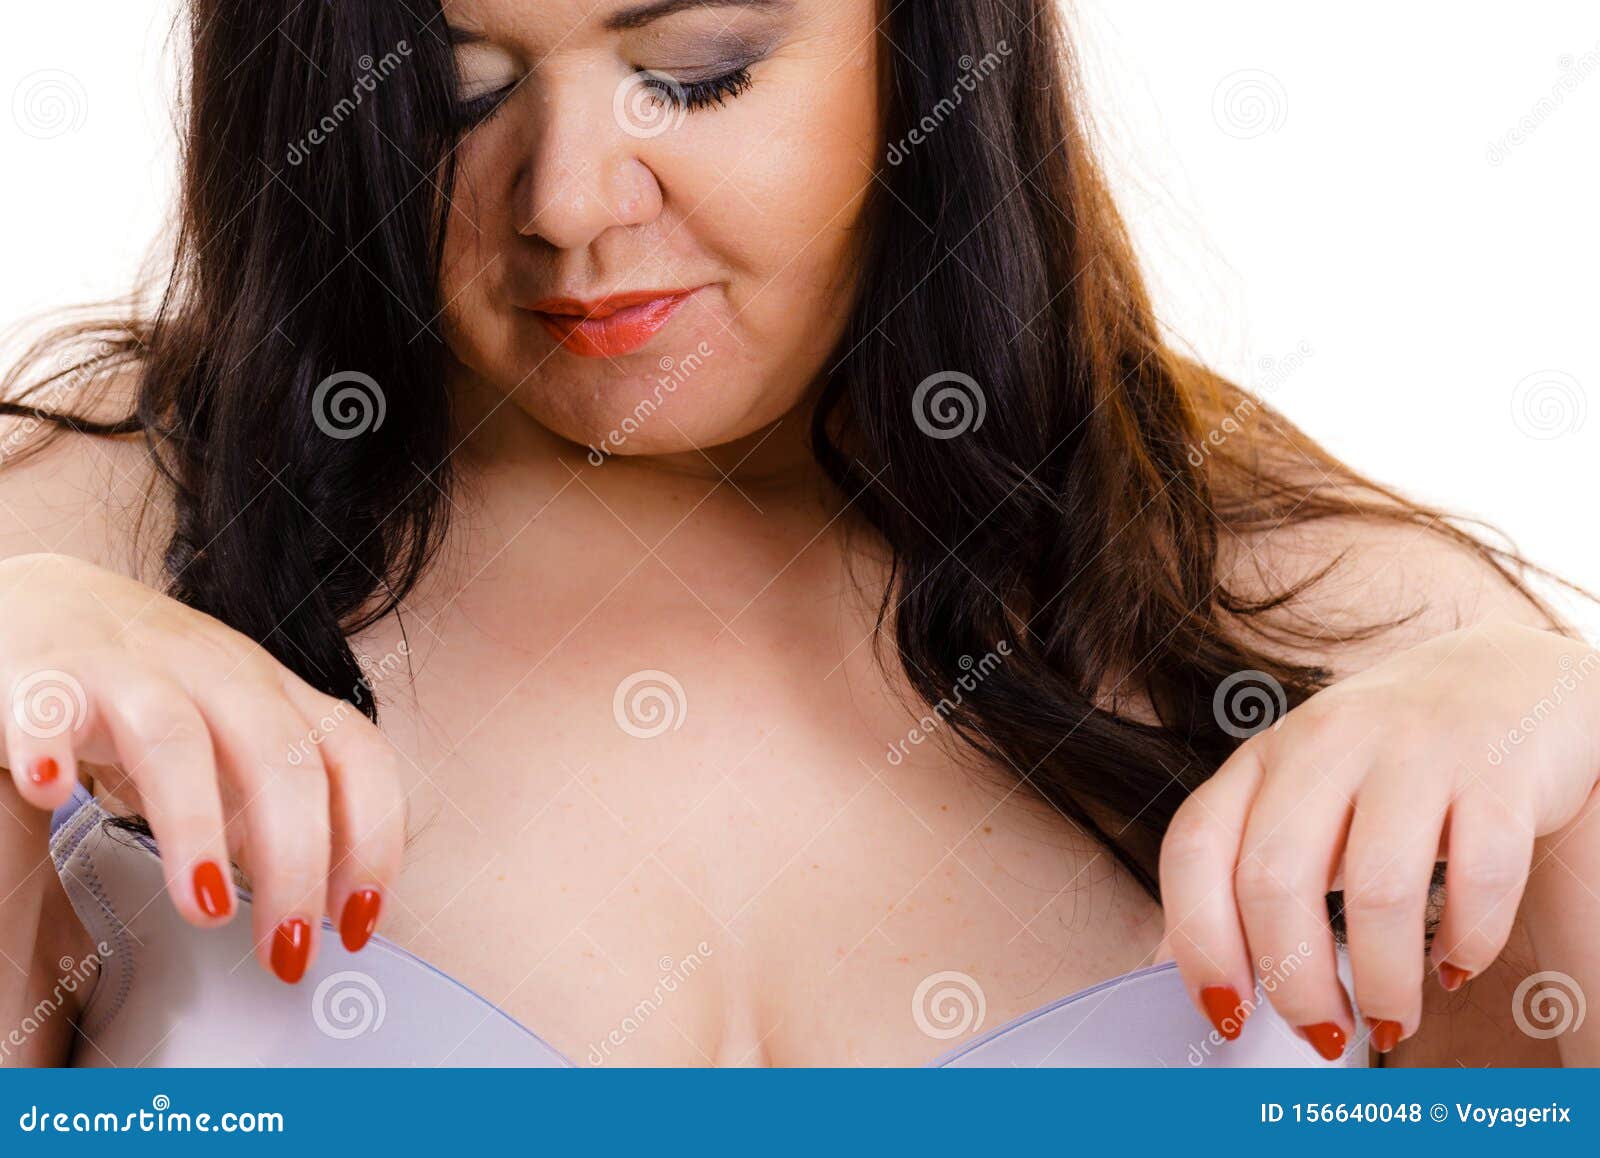 Mature Women With Large Breasts